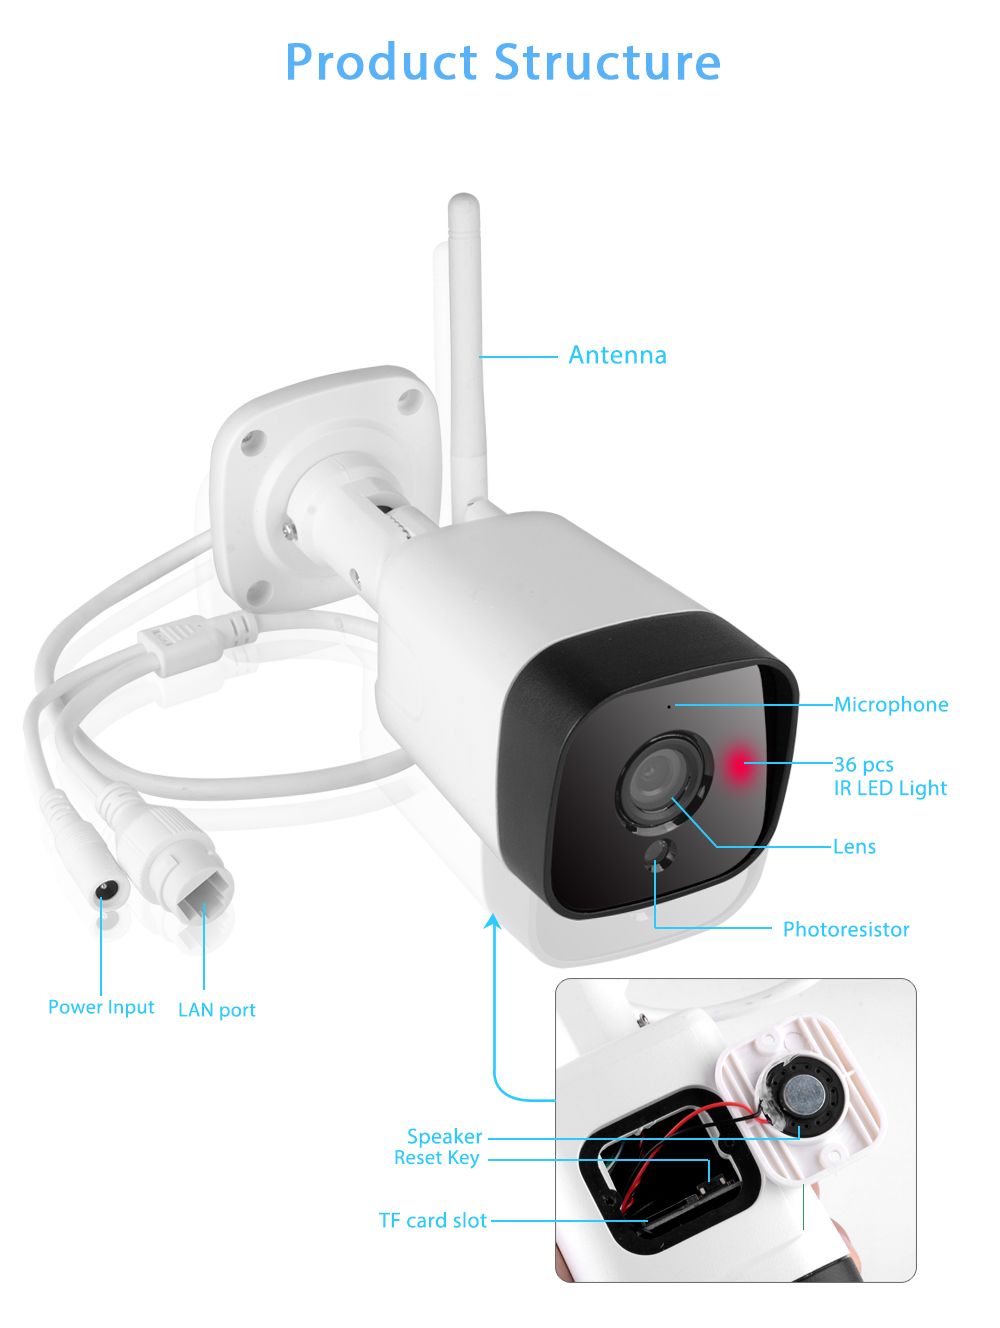 Wanscam-K23A-3MP-Wifi-Security-IP-Camera-Waterproof-18M-Night-Vision-IR-cuts-High-Definition-Surveil-1692548